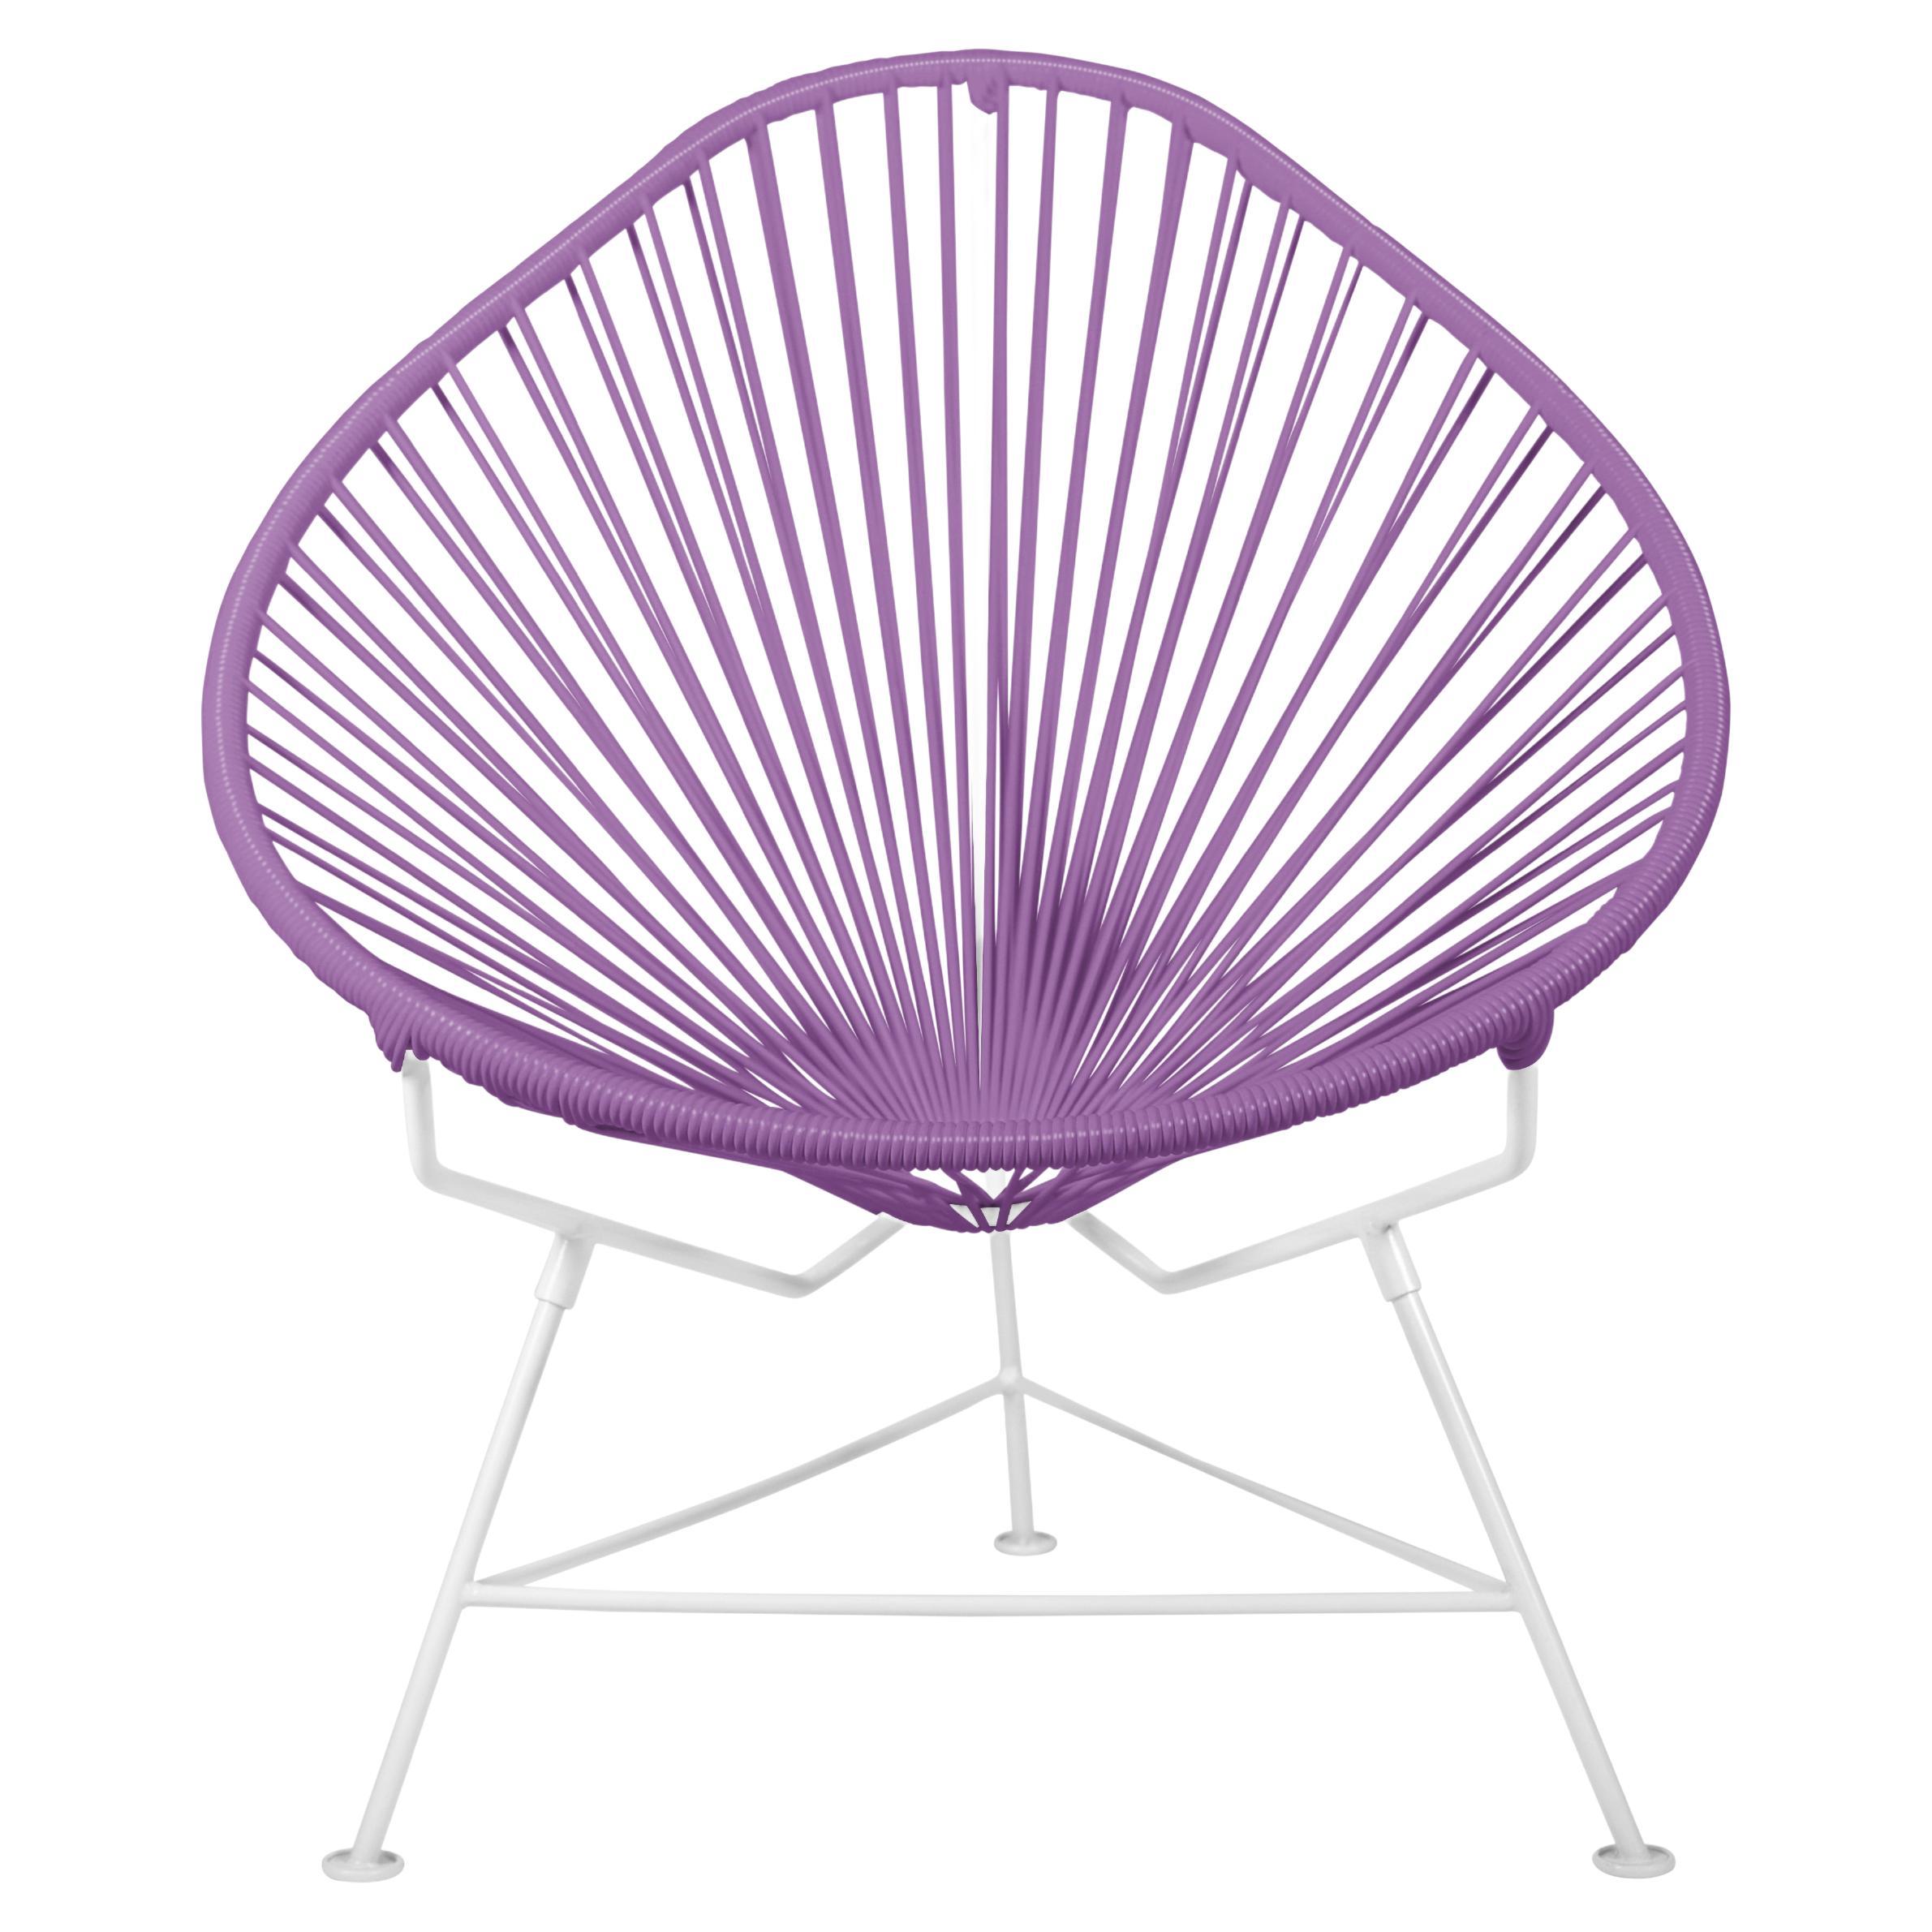 Innit Designs Acapulco Chair Orchid Weave on White Frame